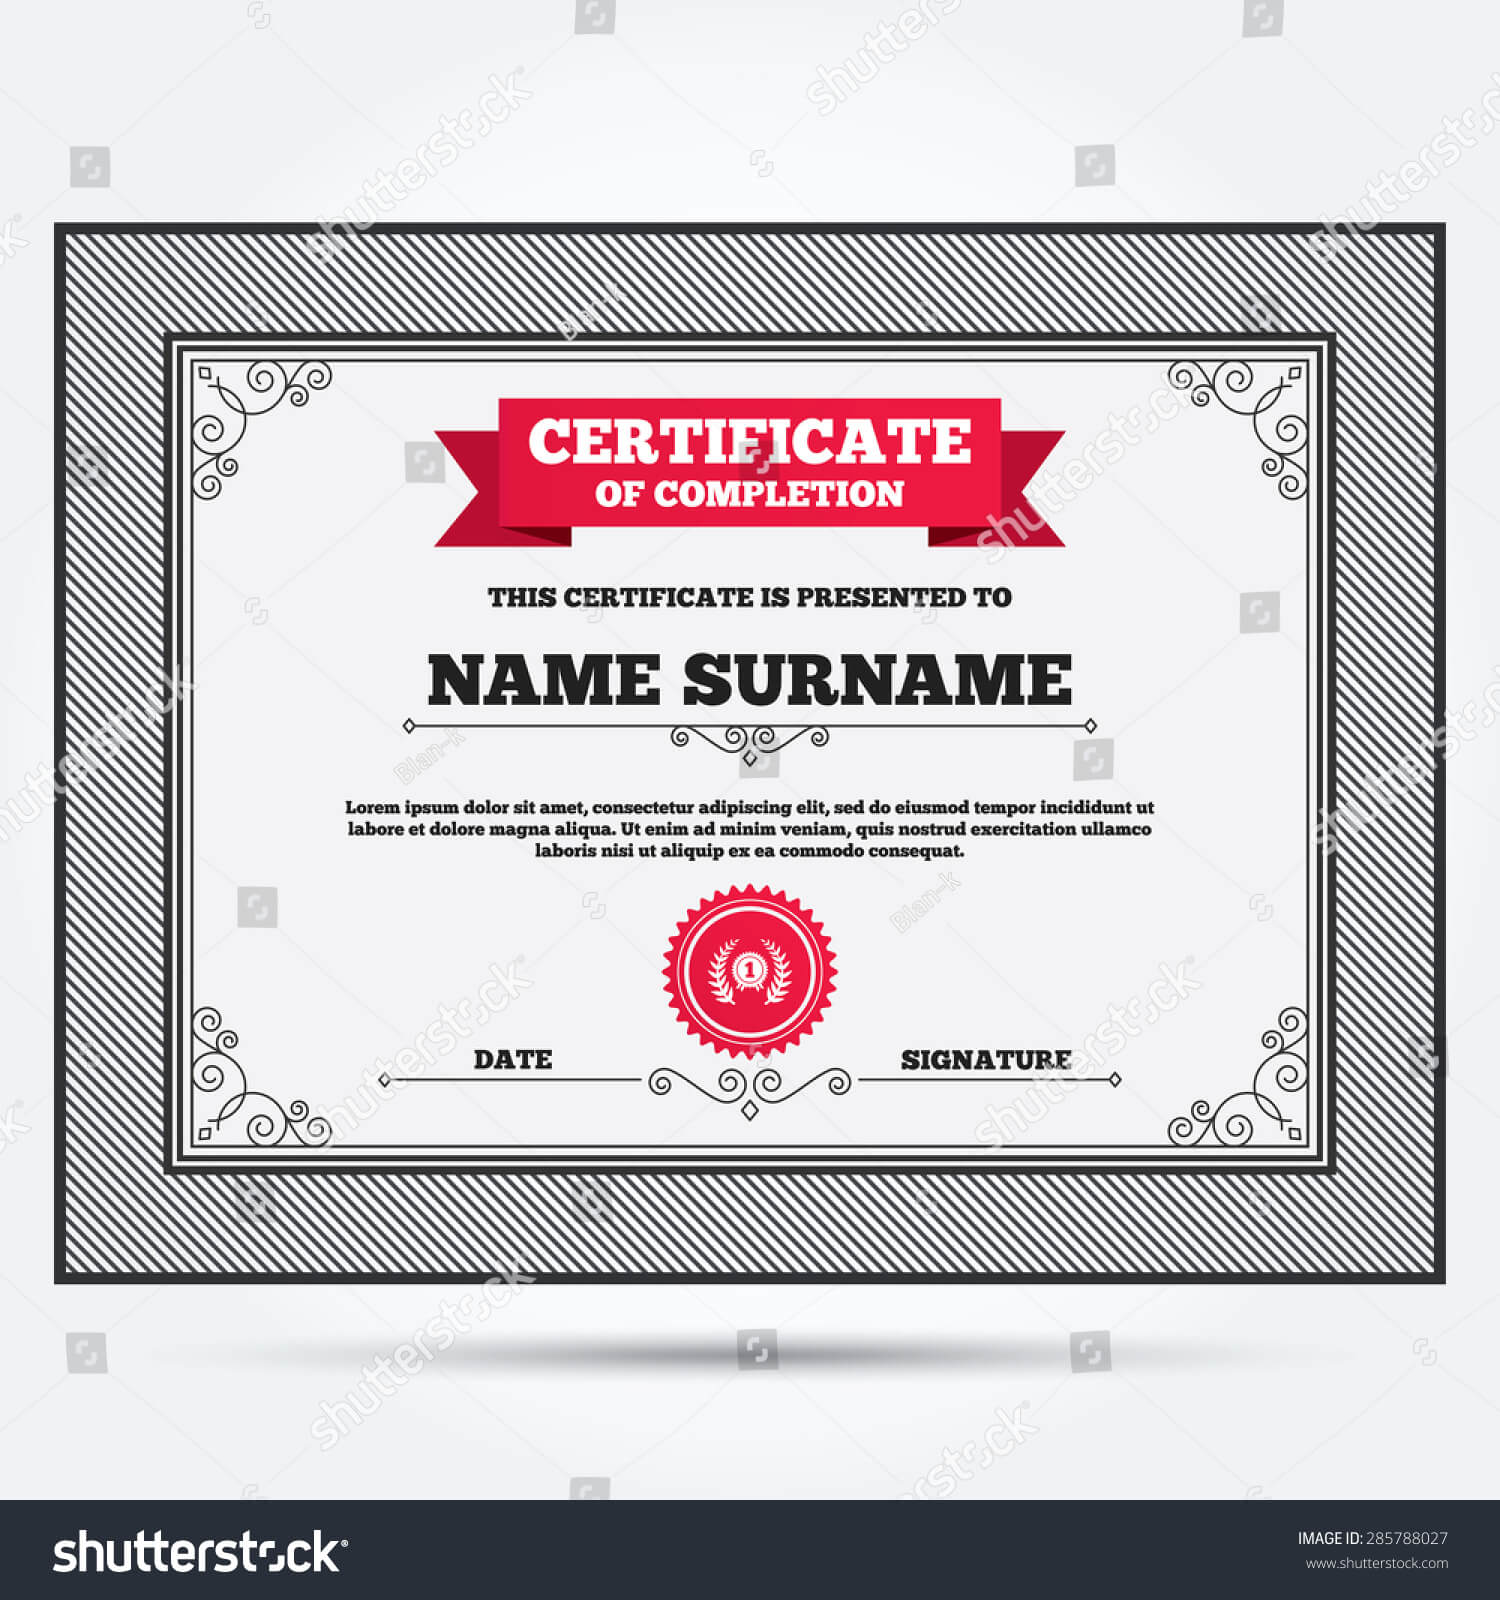 Certificate Completion First Place Award Sign Stock Vector Within First Place Certificate Template